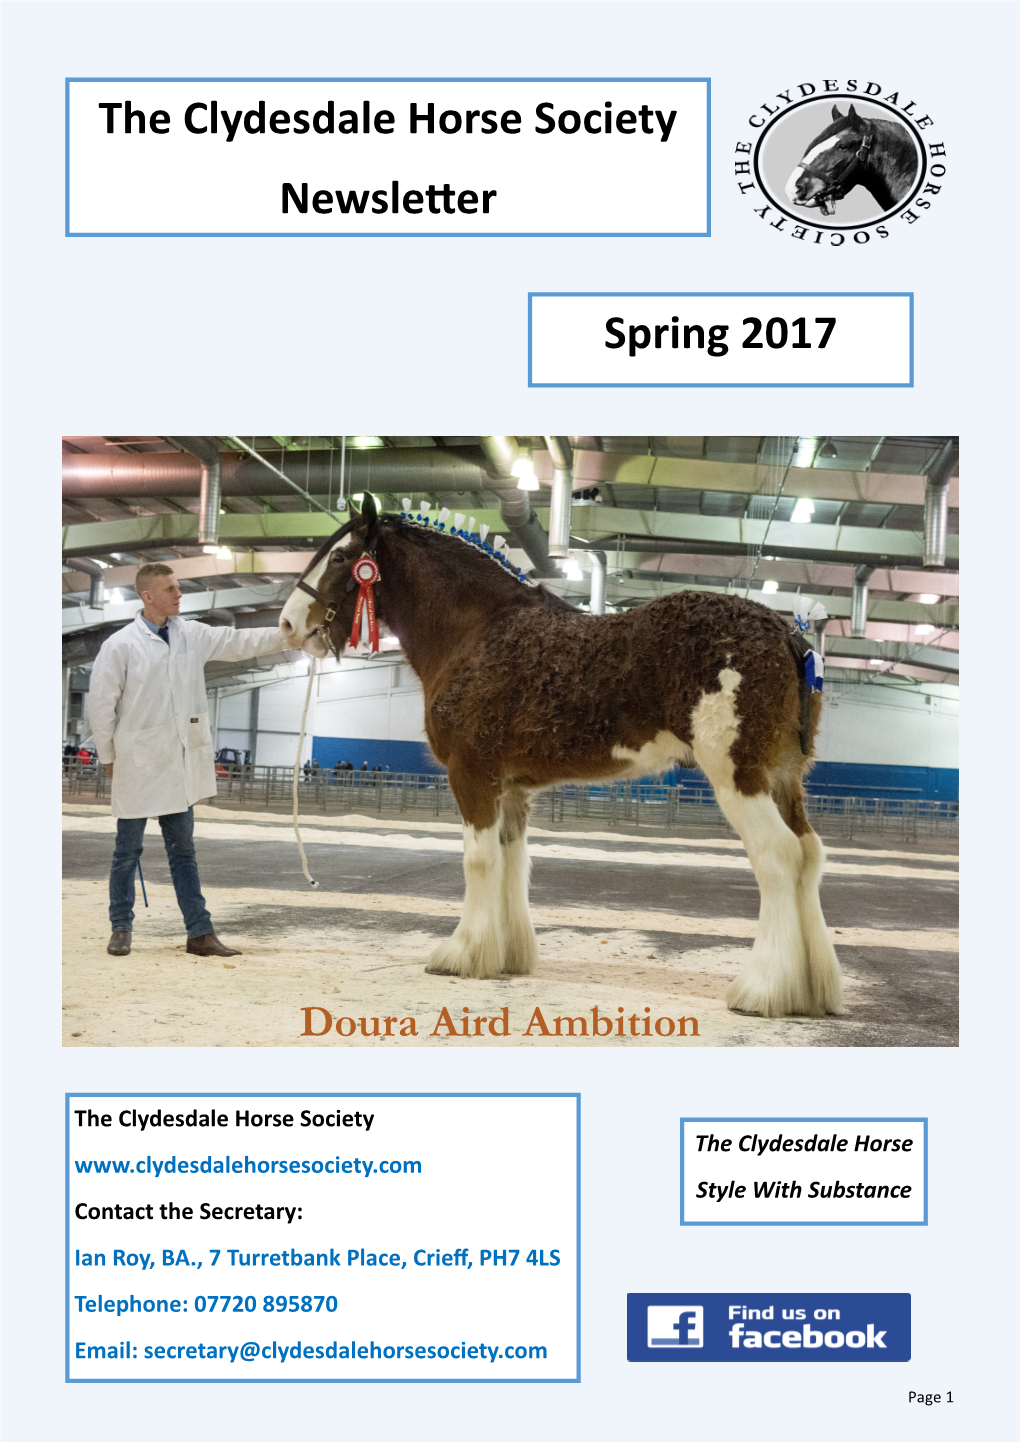 The Clydesdale Horse Society Newsletter Spring 2017